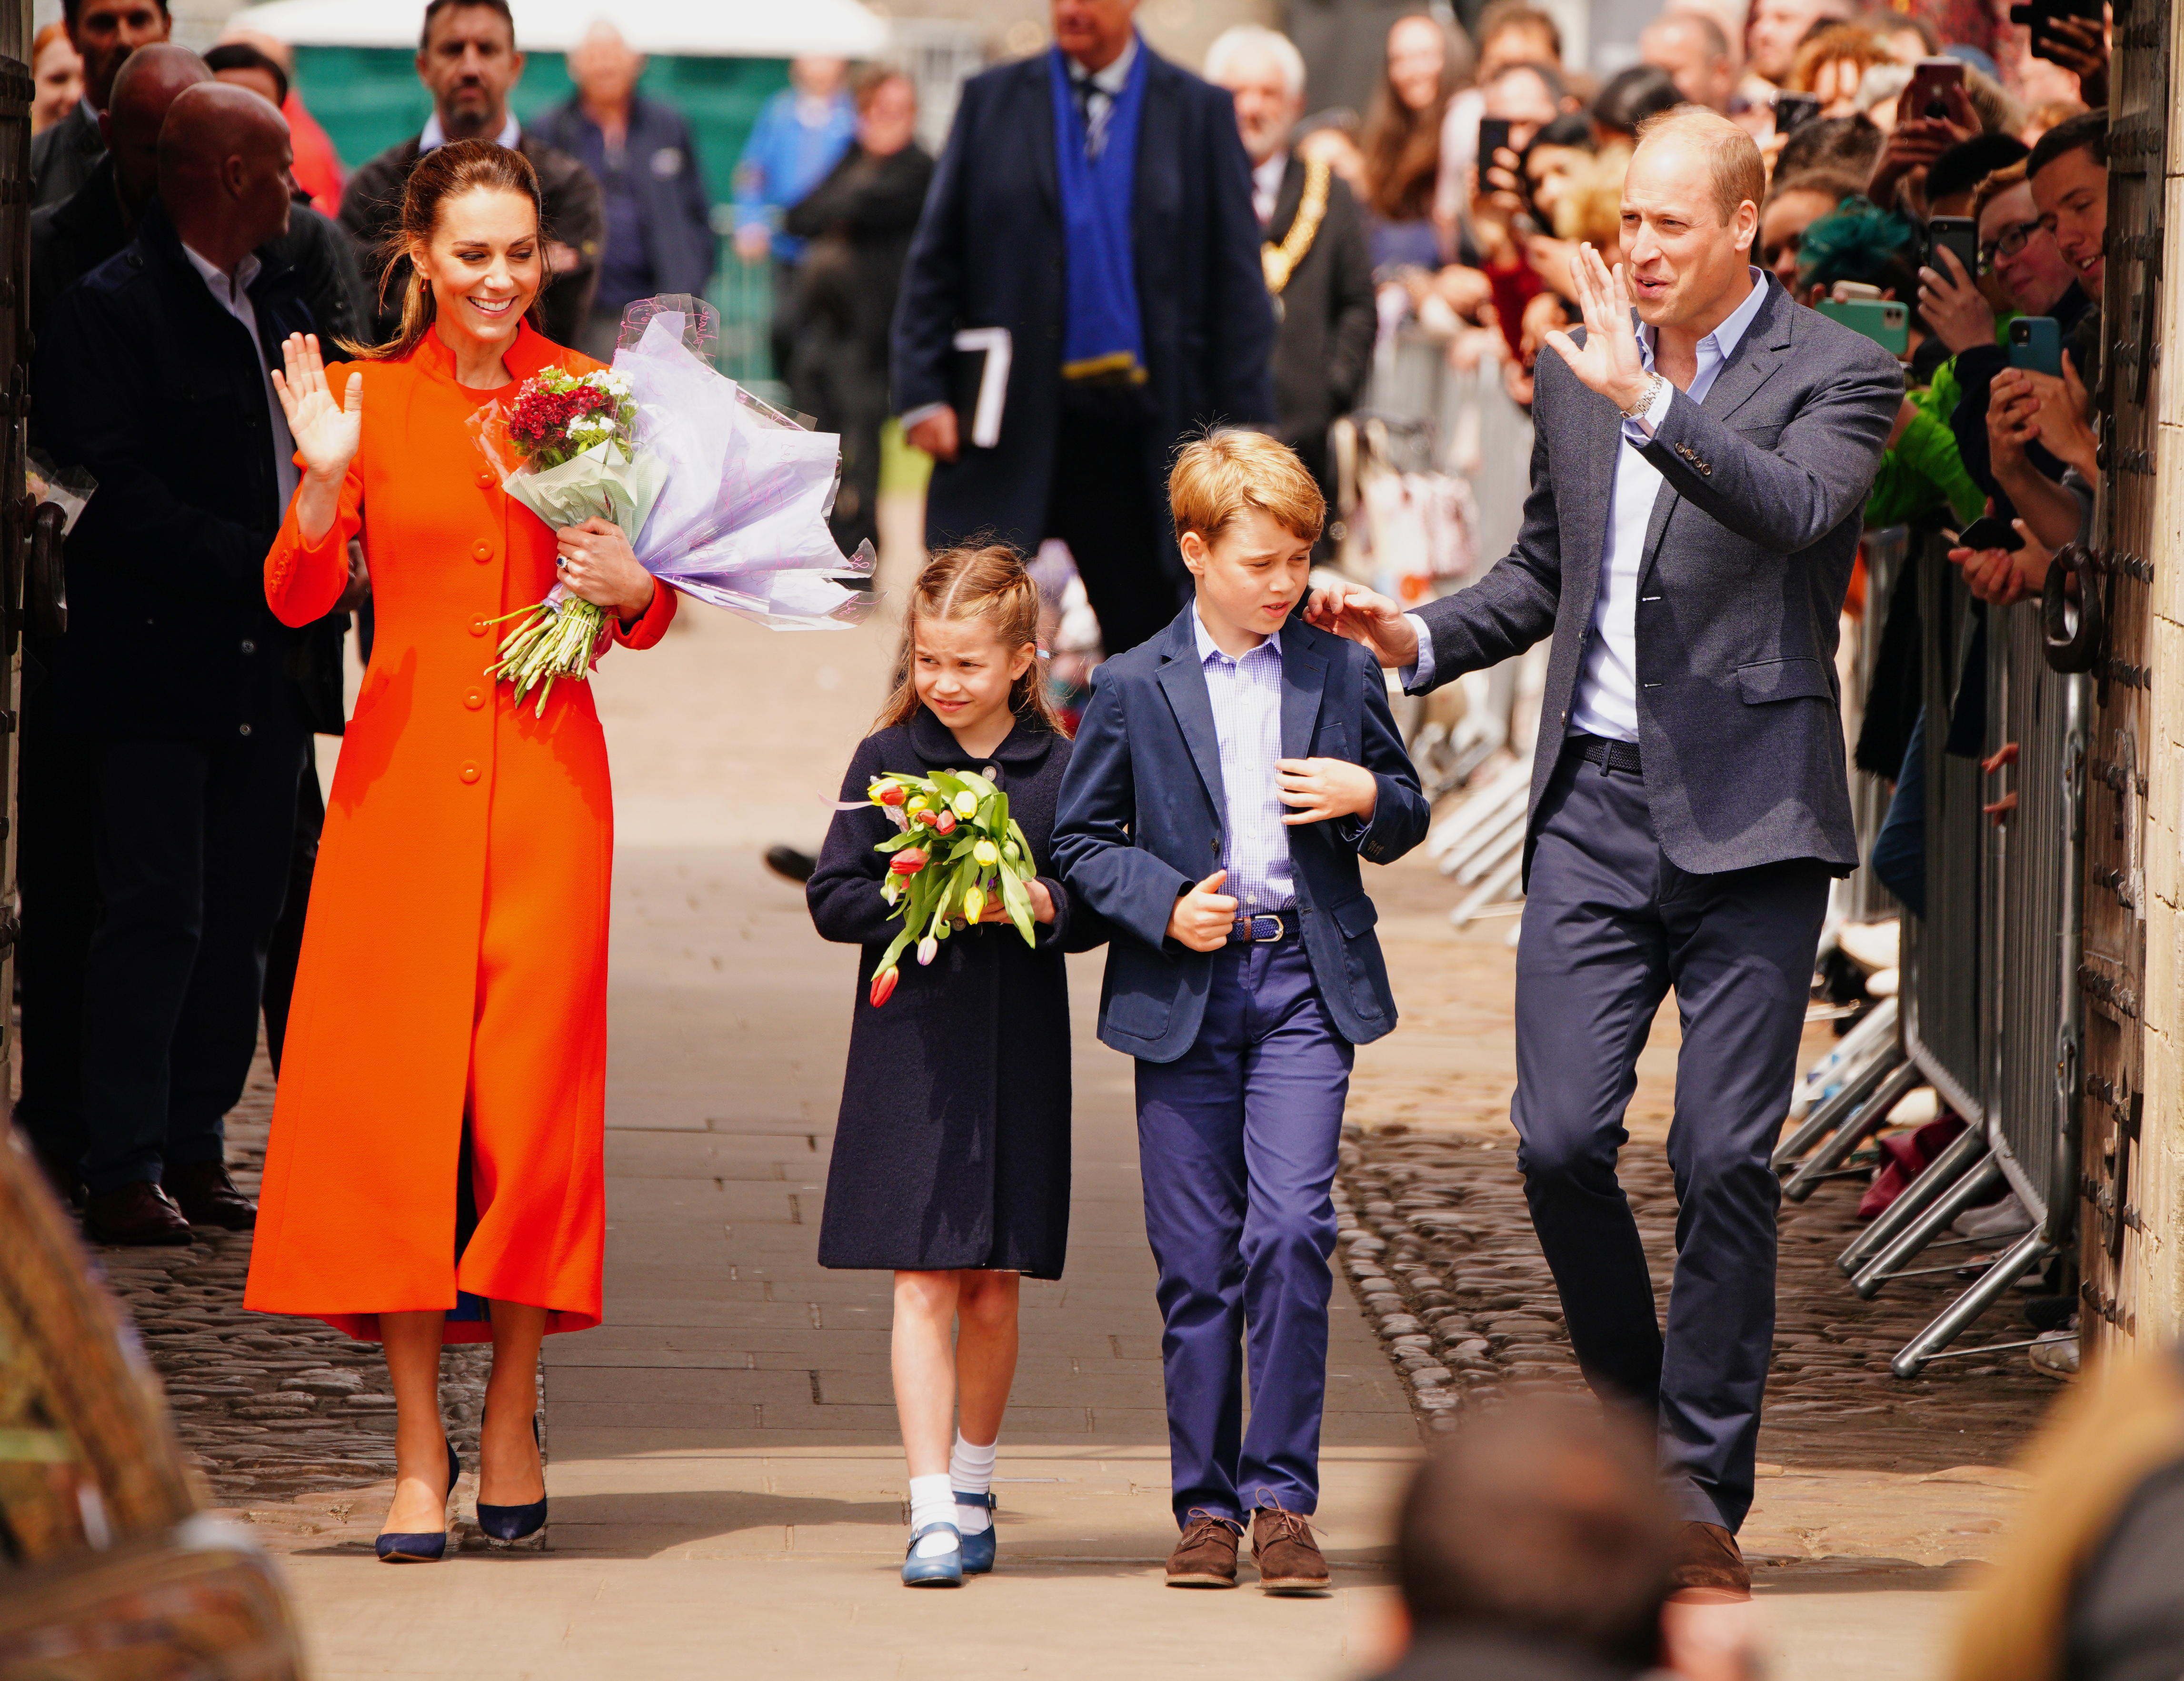 The Duke and Duchess of Cambridge, Prince George and Princess Charlotte speak to wellwishers during their visit to Cardiff Castle